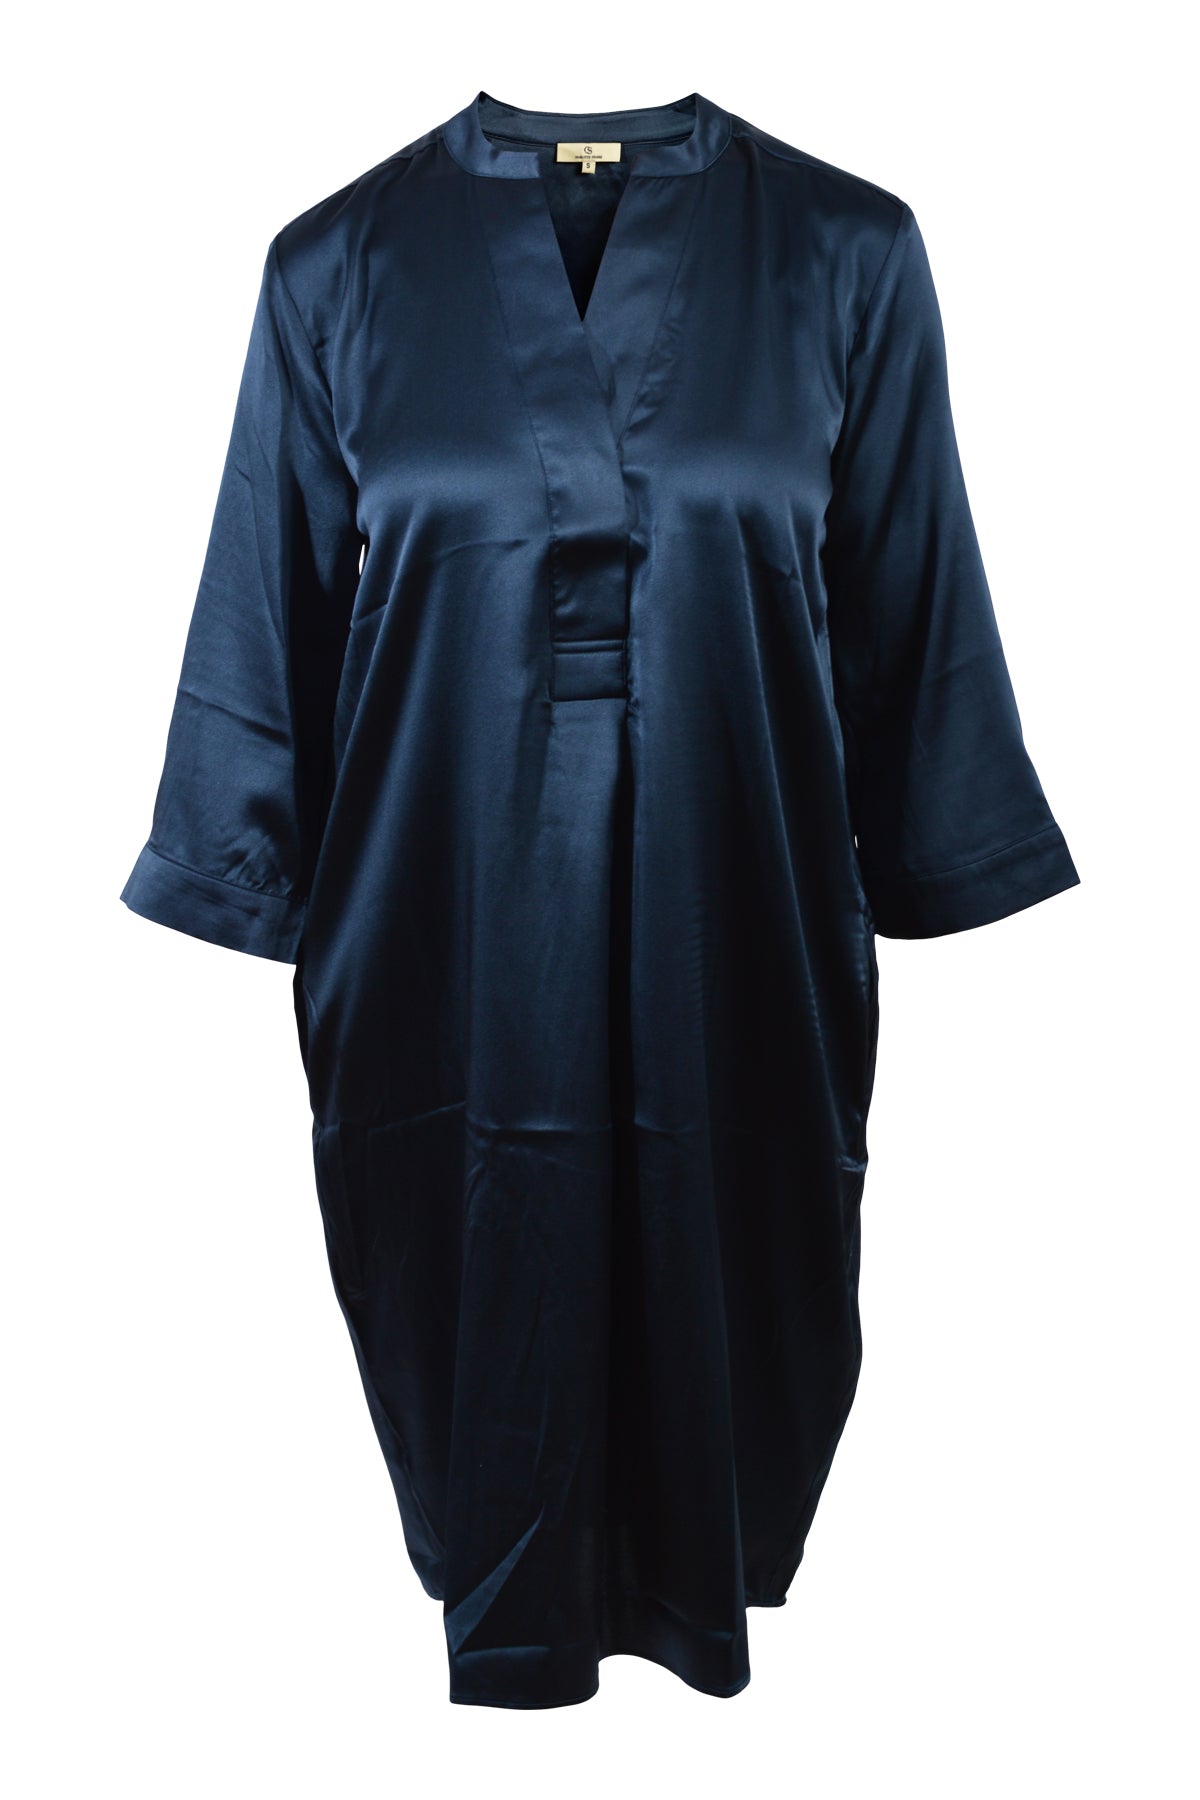 Charlotte Sparre Winter Bliss Dress 3021, Solid Satin Navy